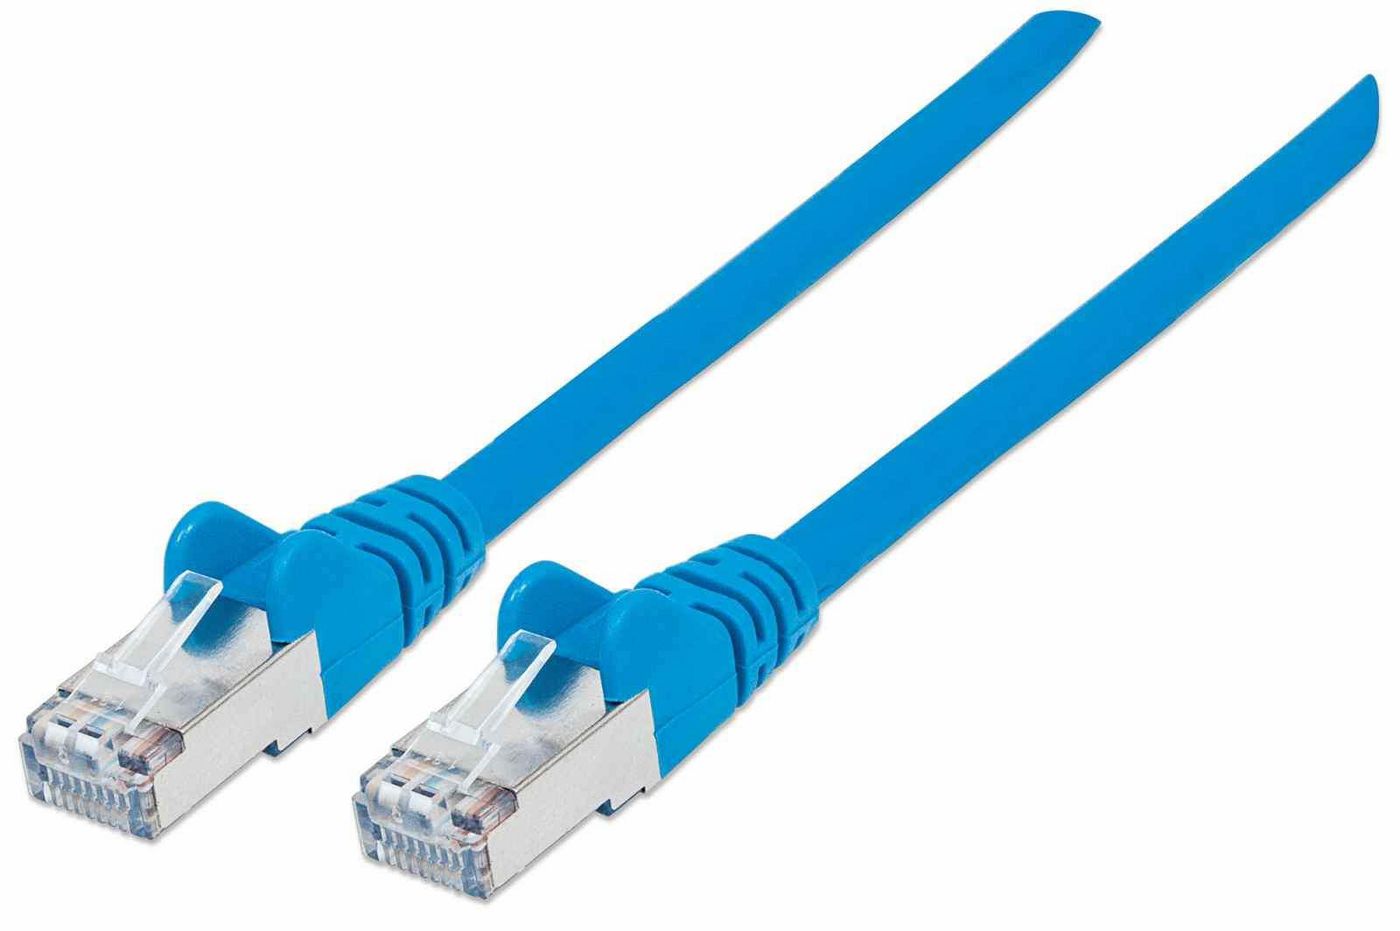 Intellinet 740913 High Performance Network Cable 